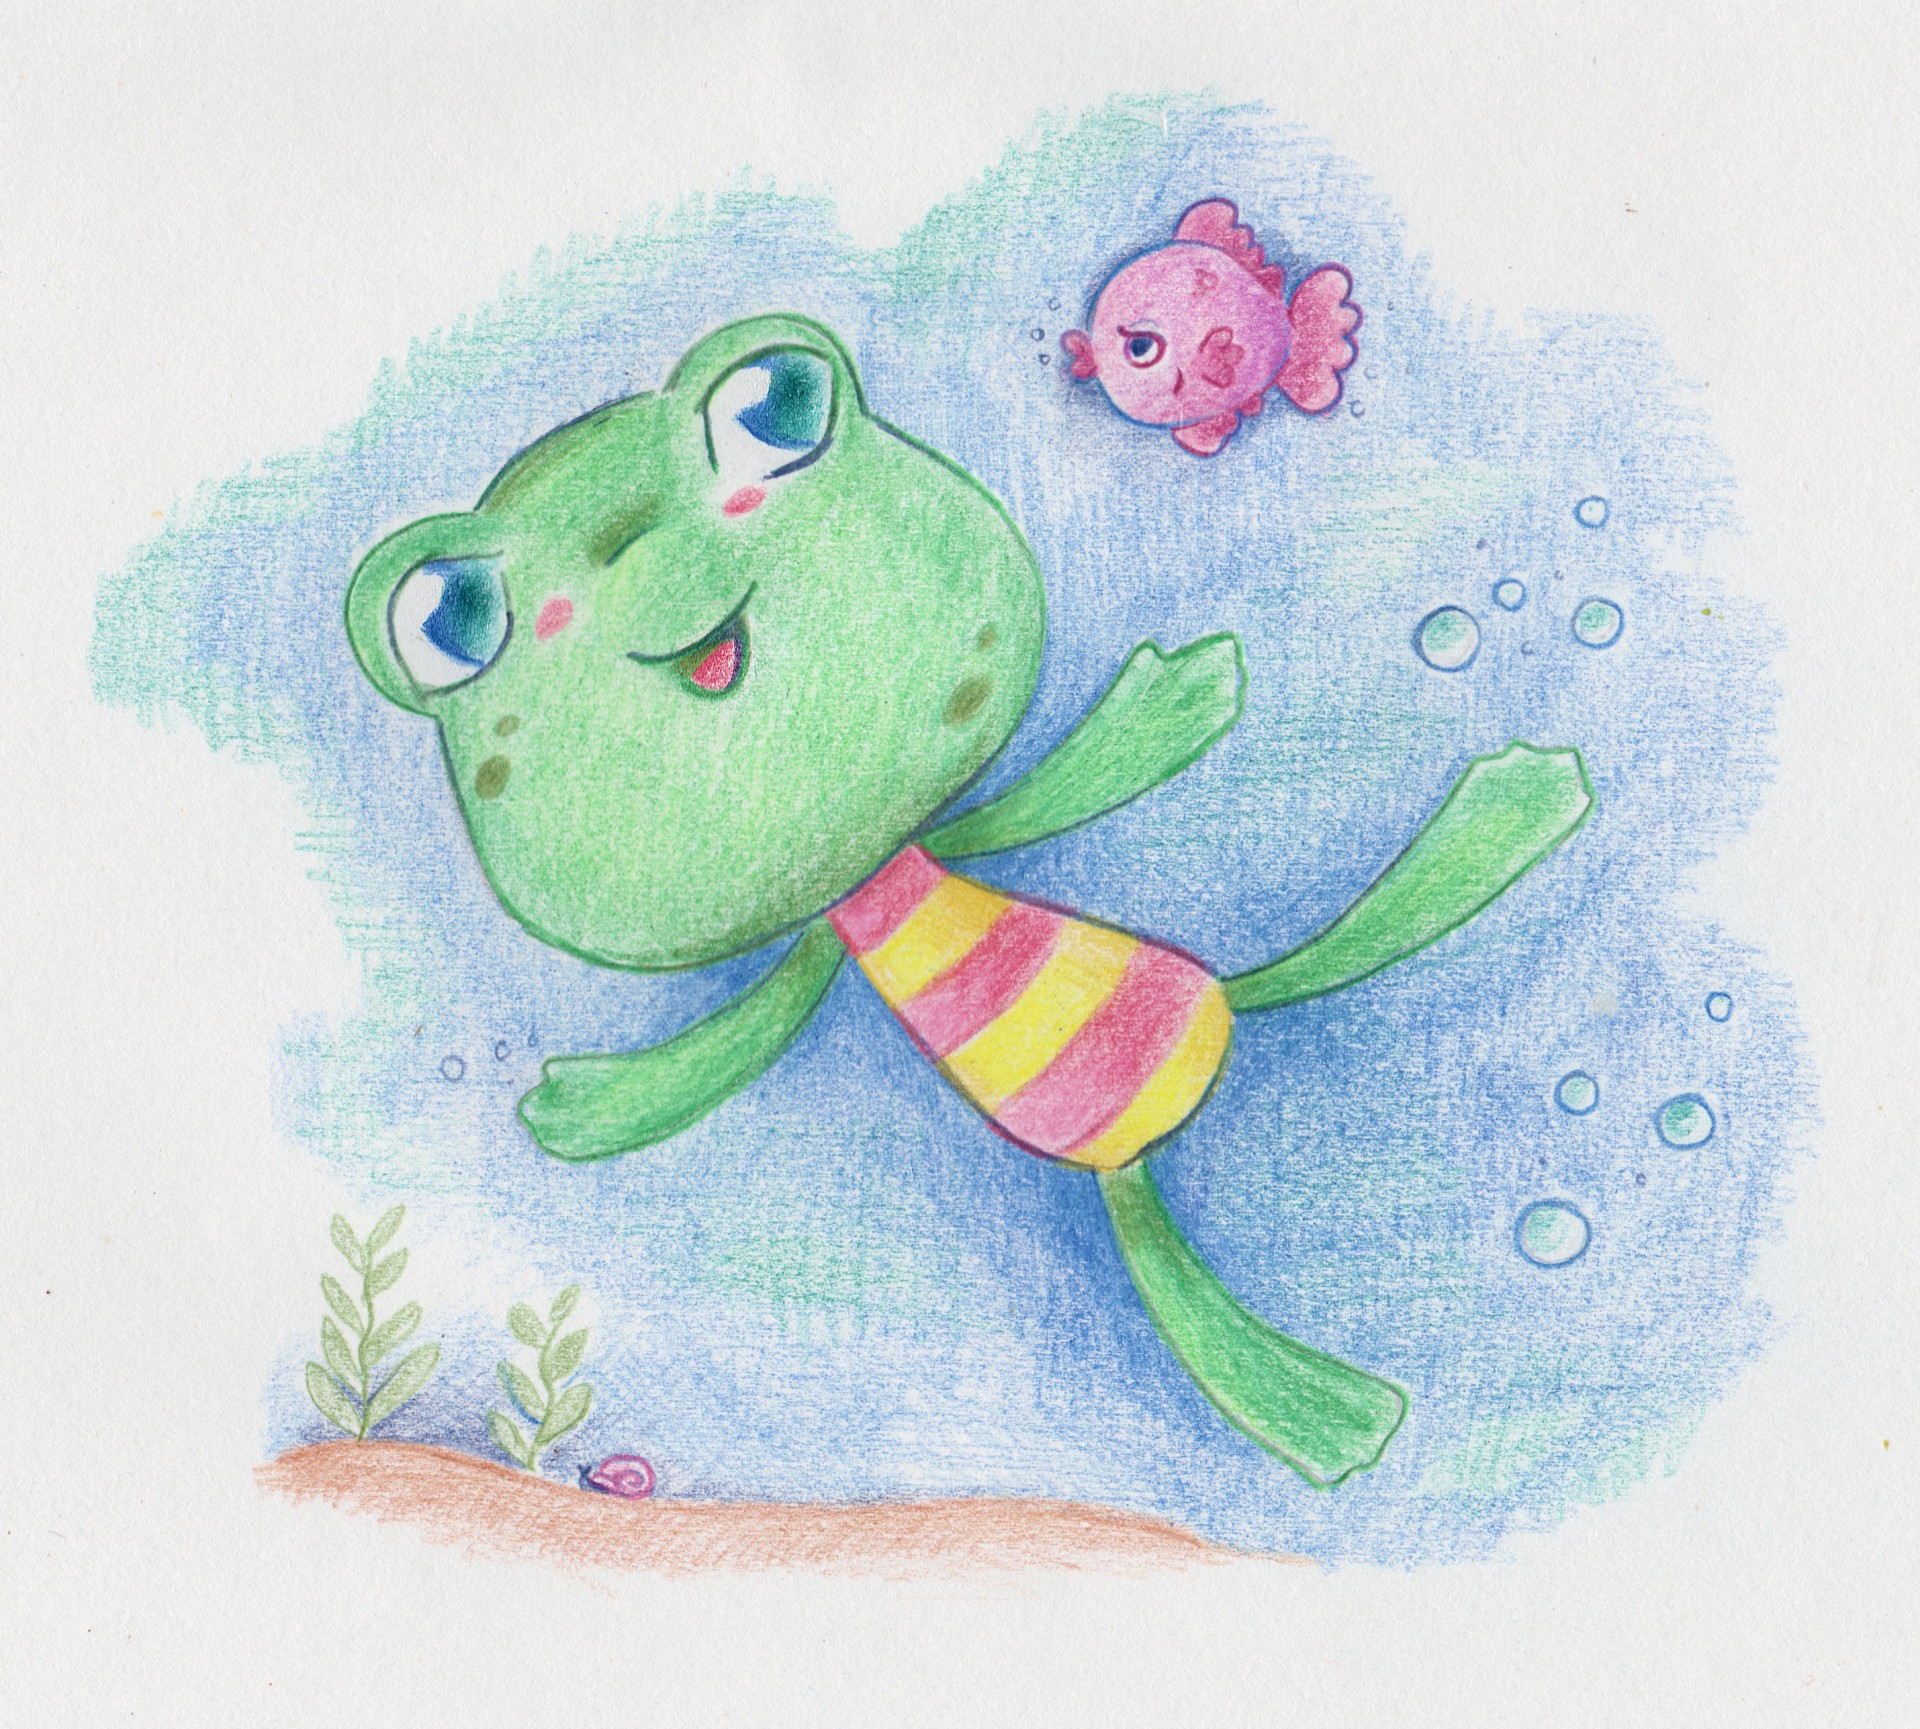 Colored pencil drawing of a cartoon-style frog going for a swim